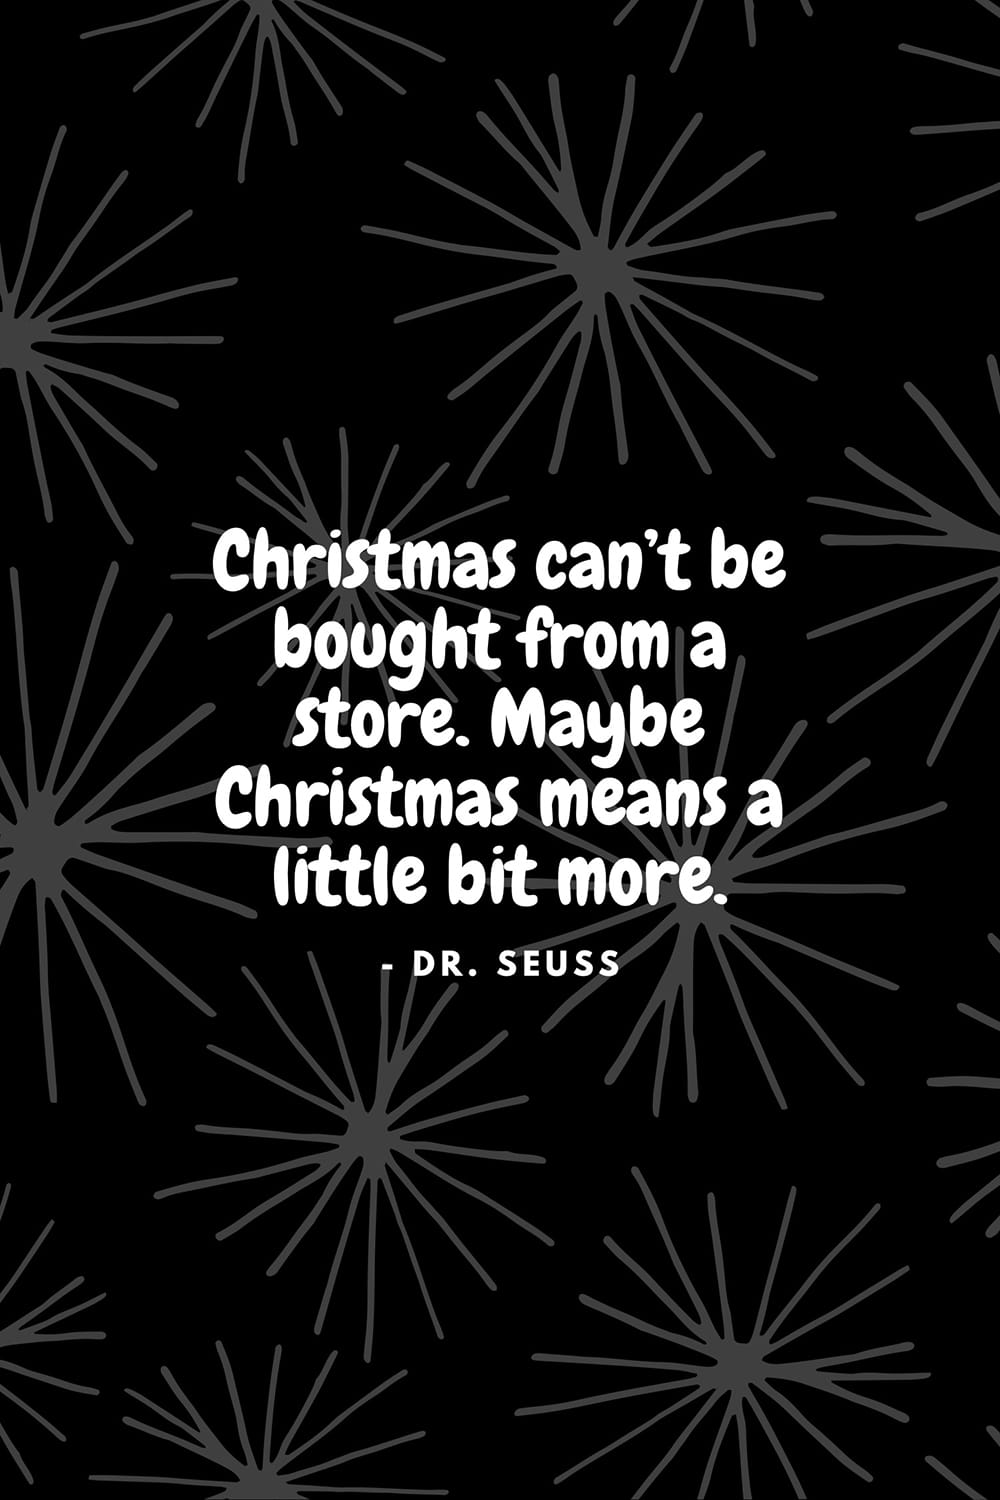 Best short Christmas quotes 12